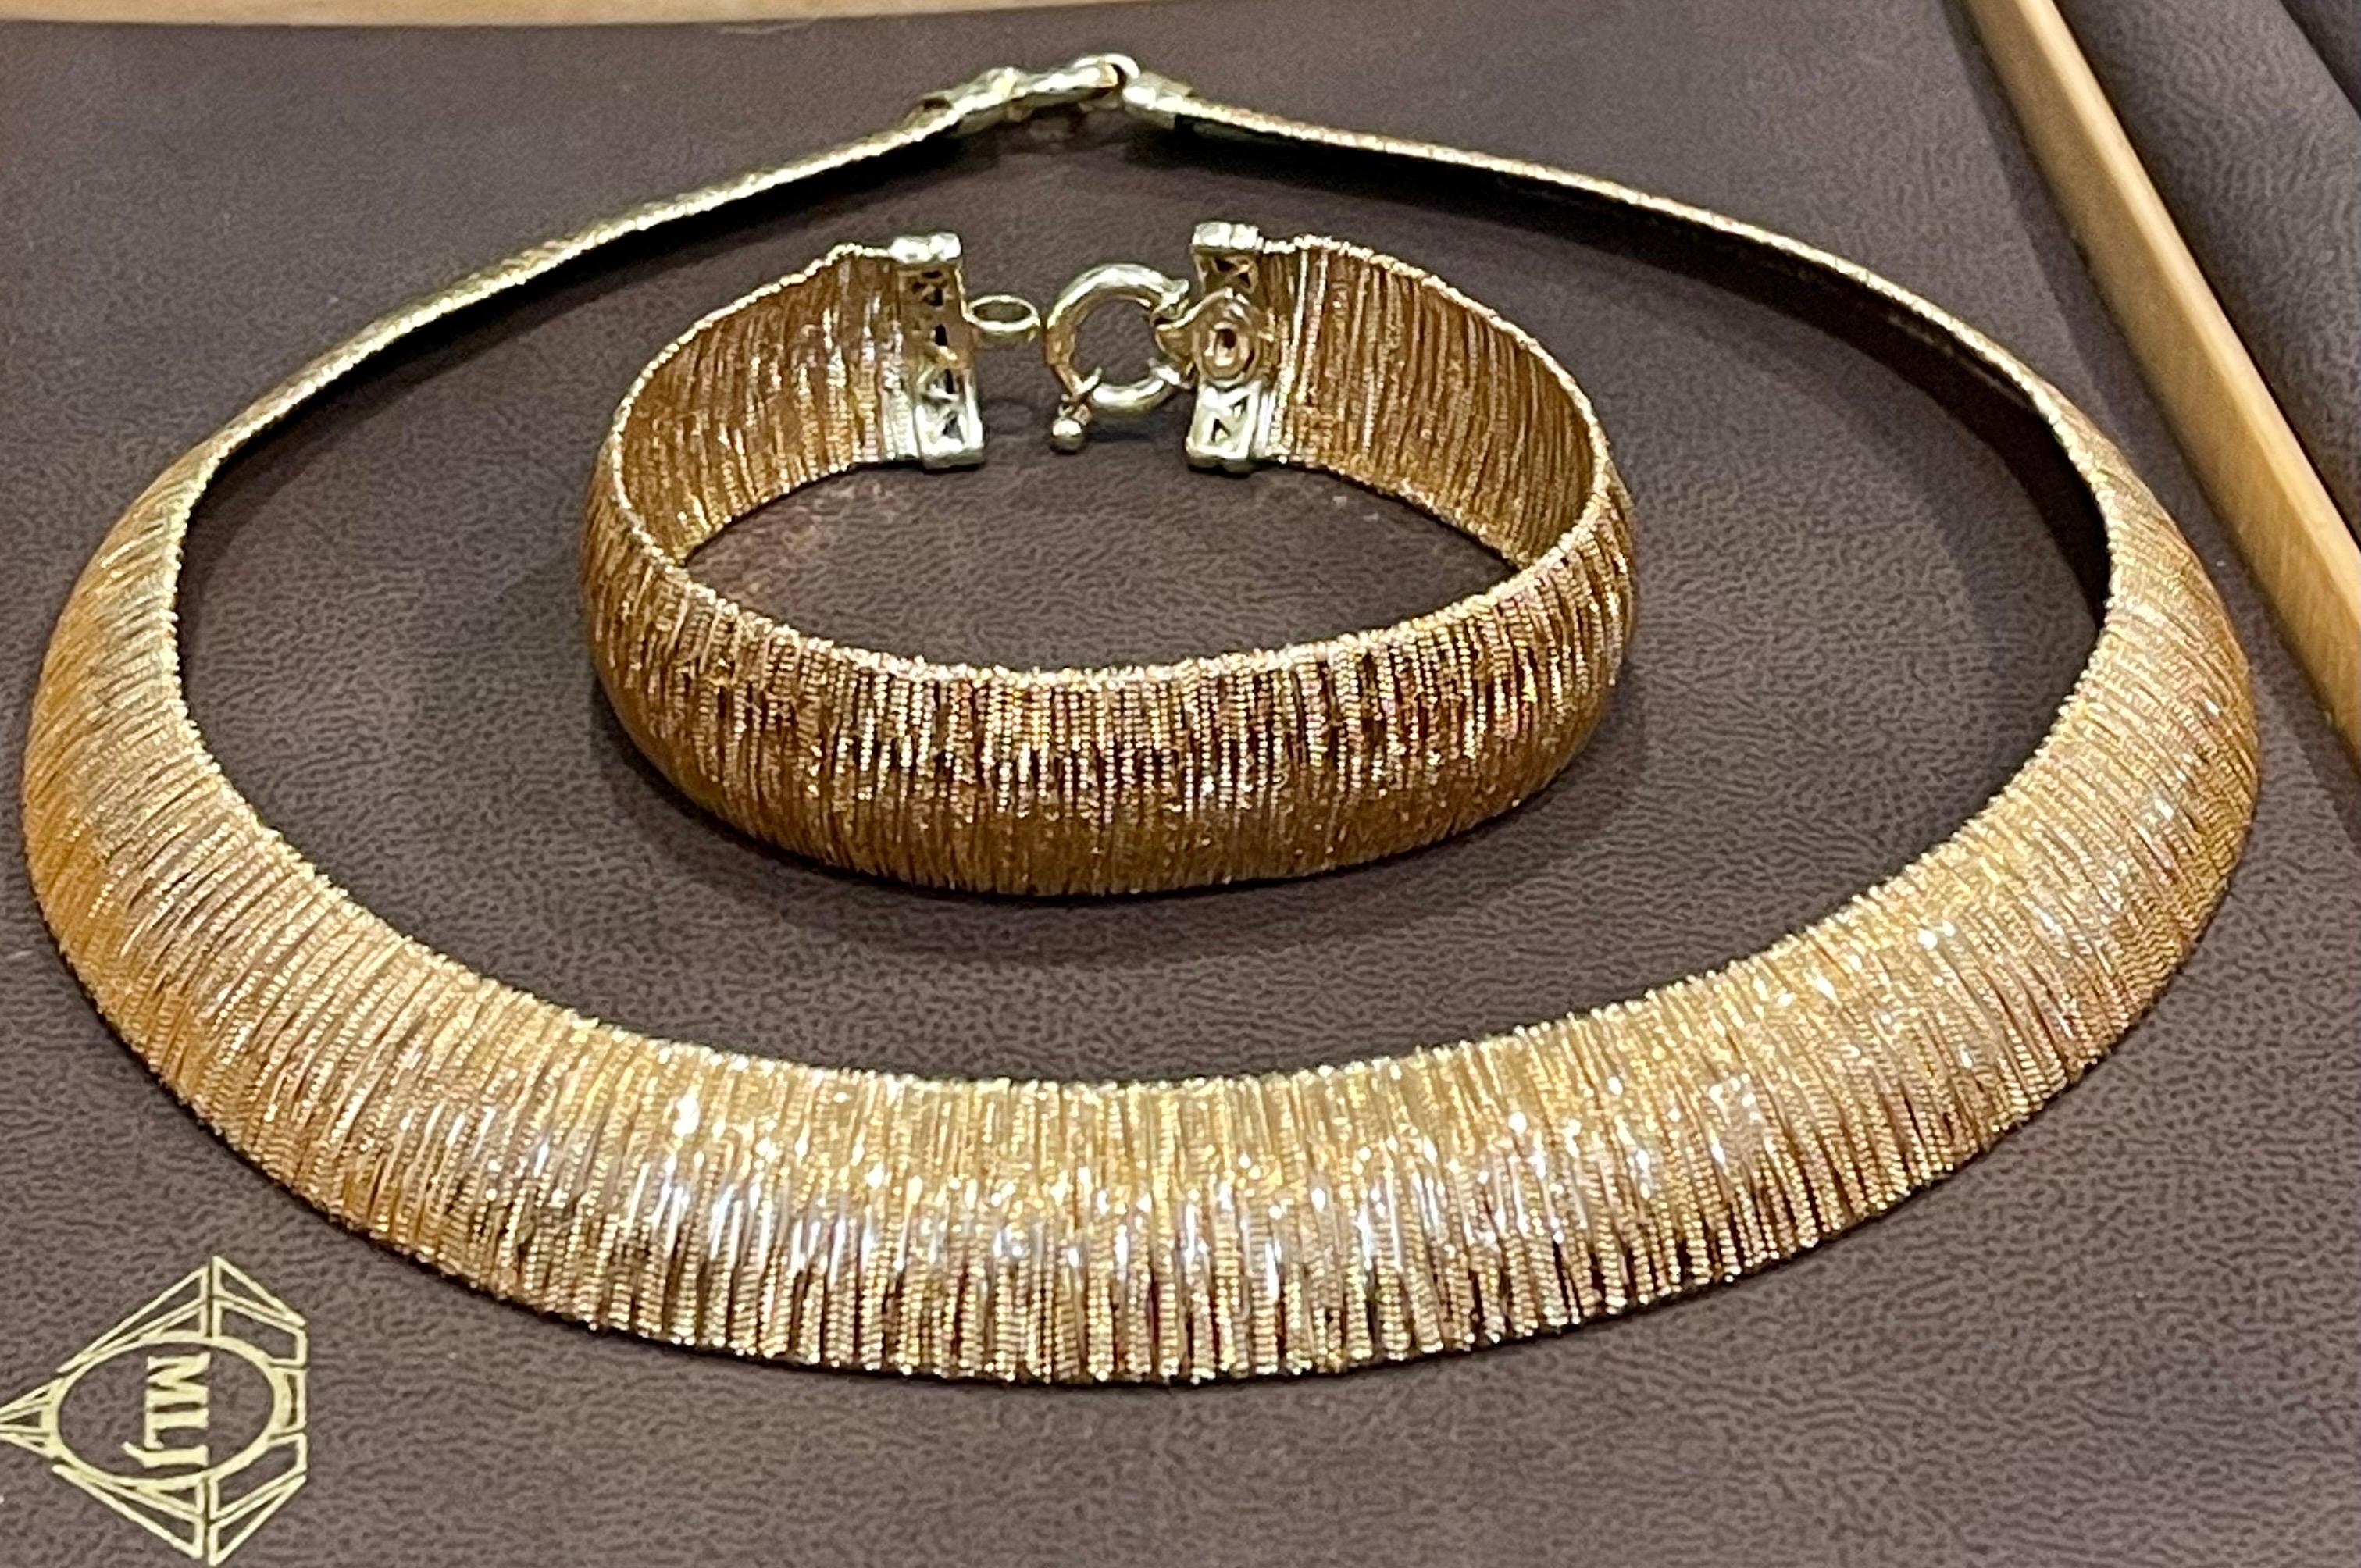 Solid 18Kt Yellow Gold Cleopatra Collar Bib Necklace Choker & Bracelet 68Gm , Italian 
Vintage 18 Karat  Hammered yellow  gold  wide collar necklace with matching bracelet.
0.75 inch  wide in middle and 1 cm wide at the end 
16 